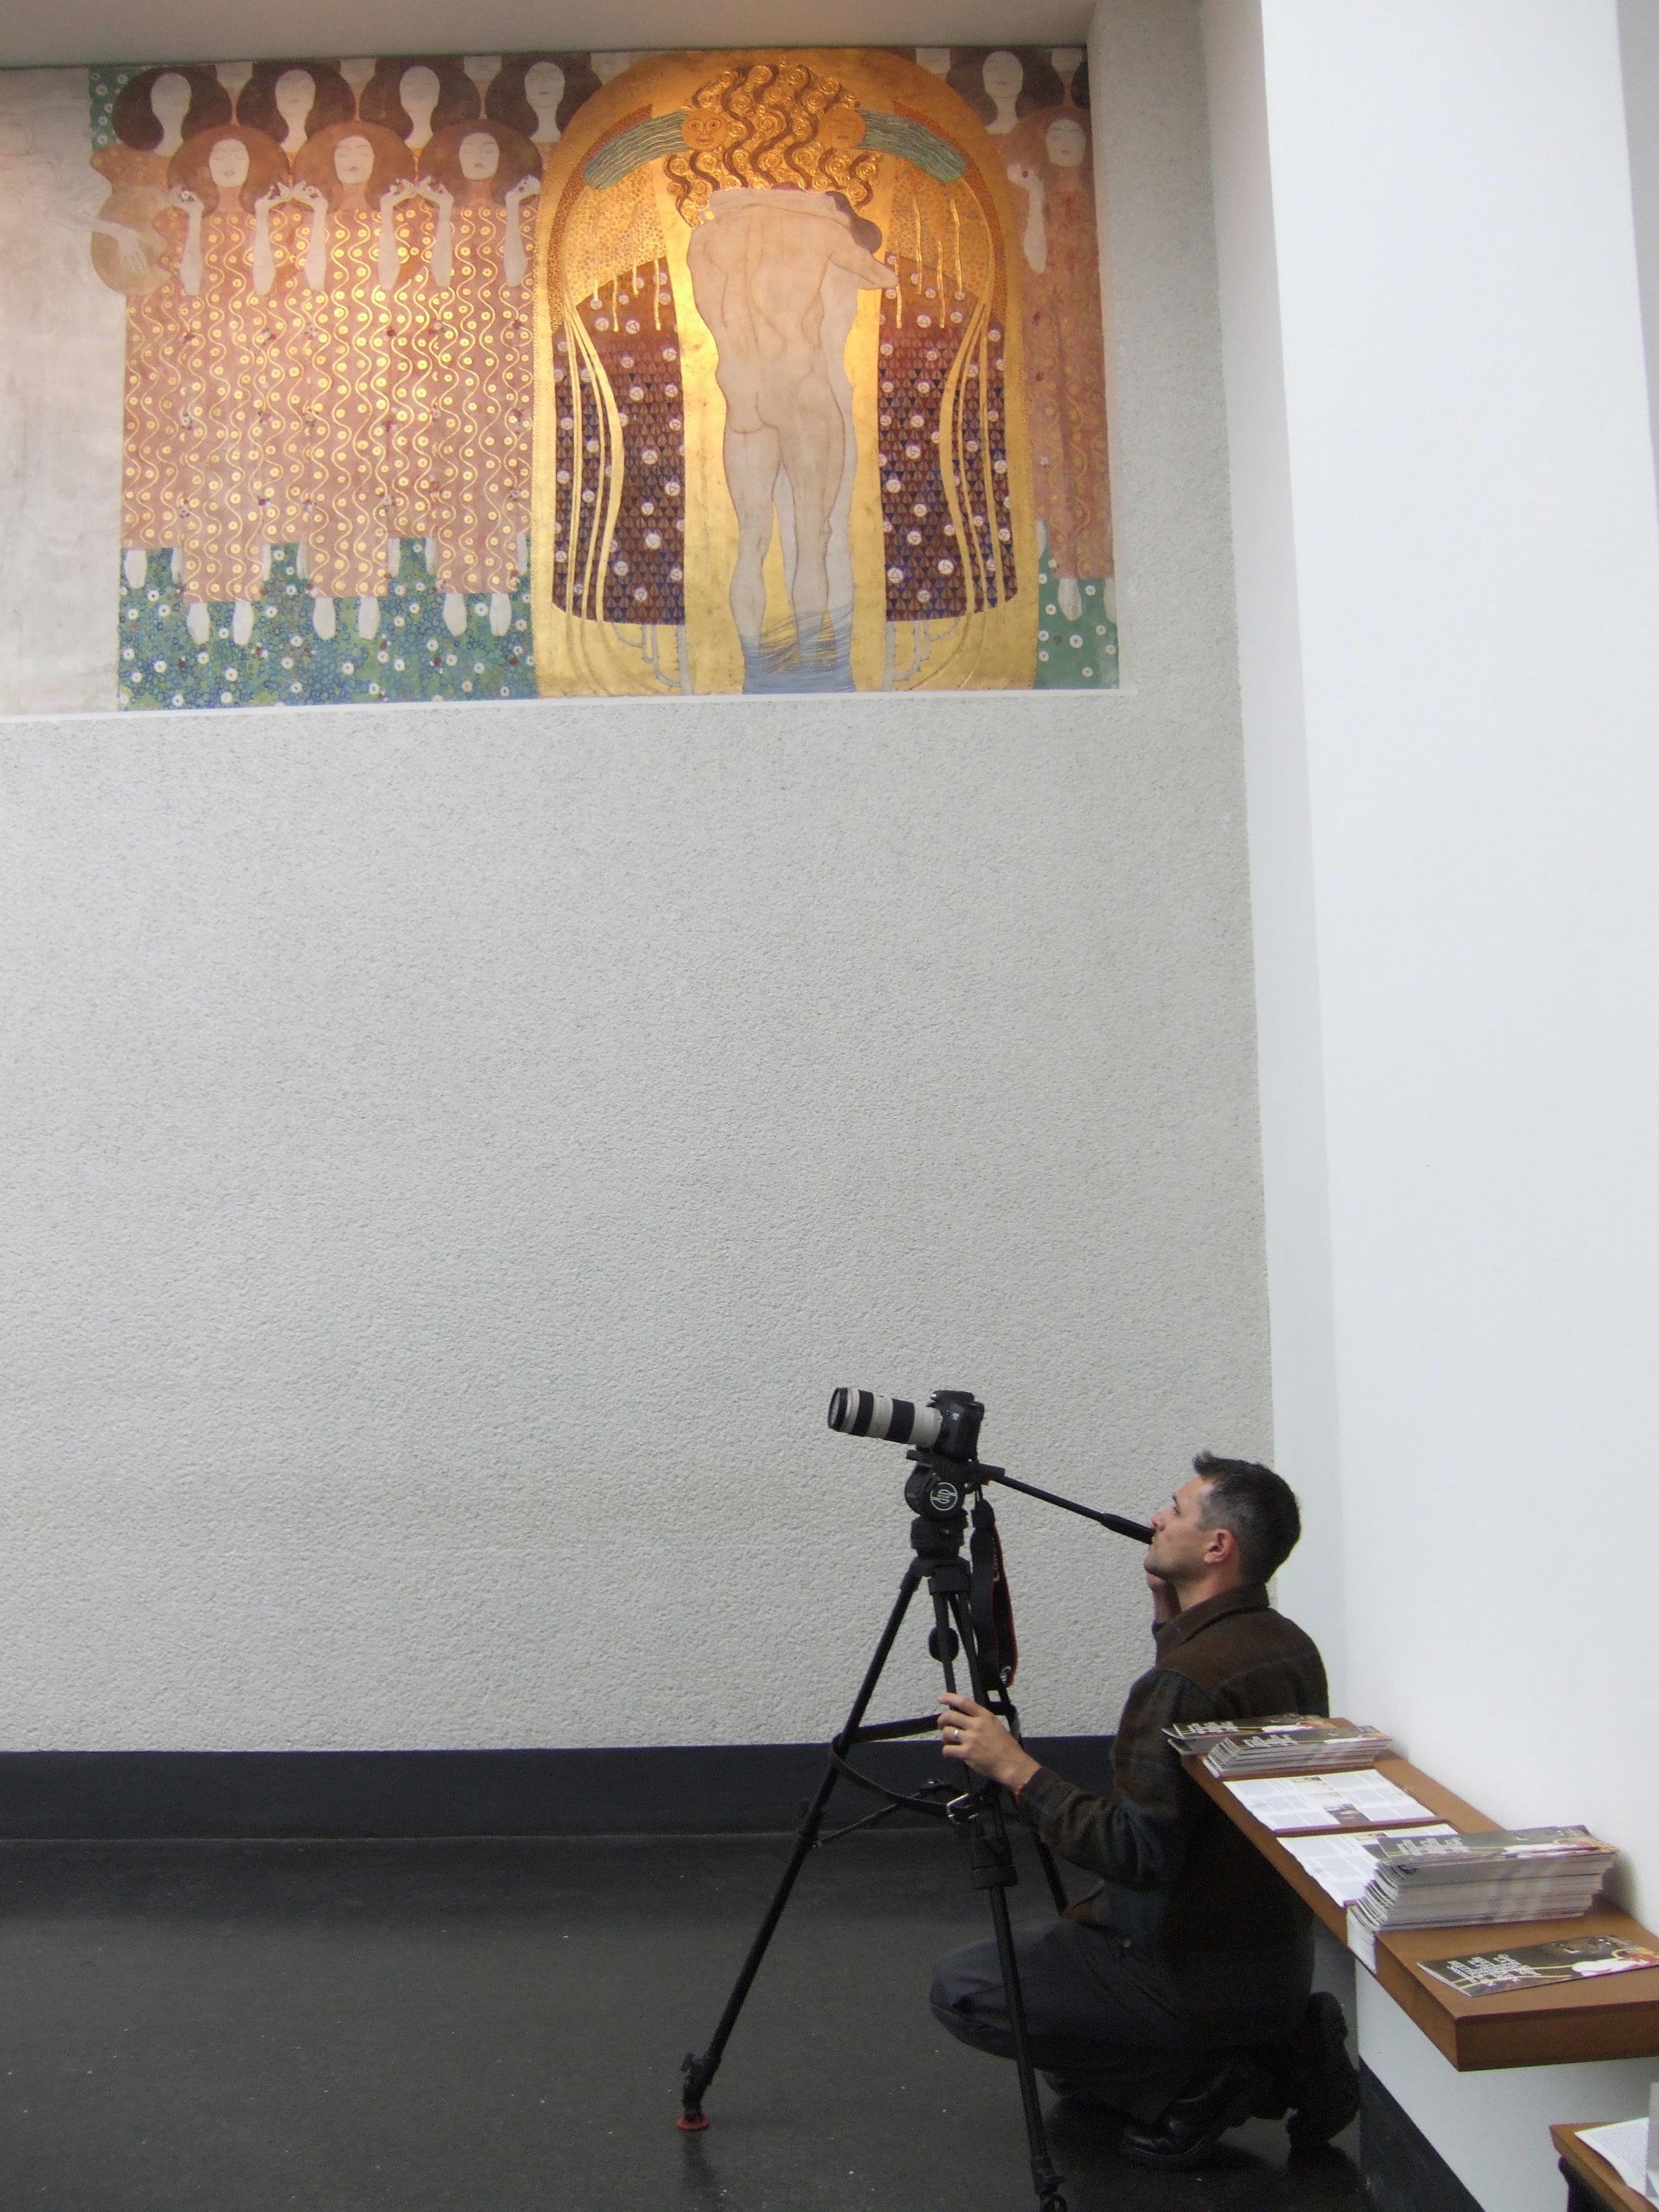 Filming Gustav Klimt's Beethoven 9th Frieze in Vienna at the Secession Museum.